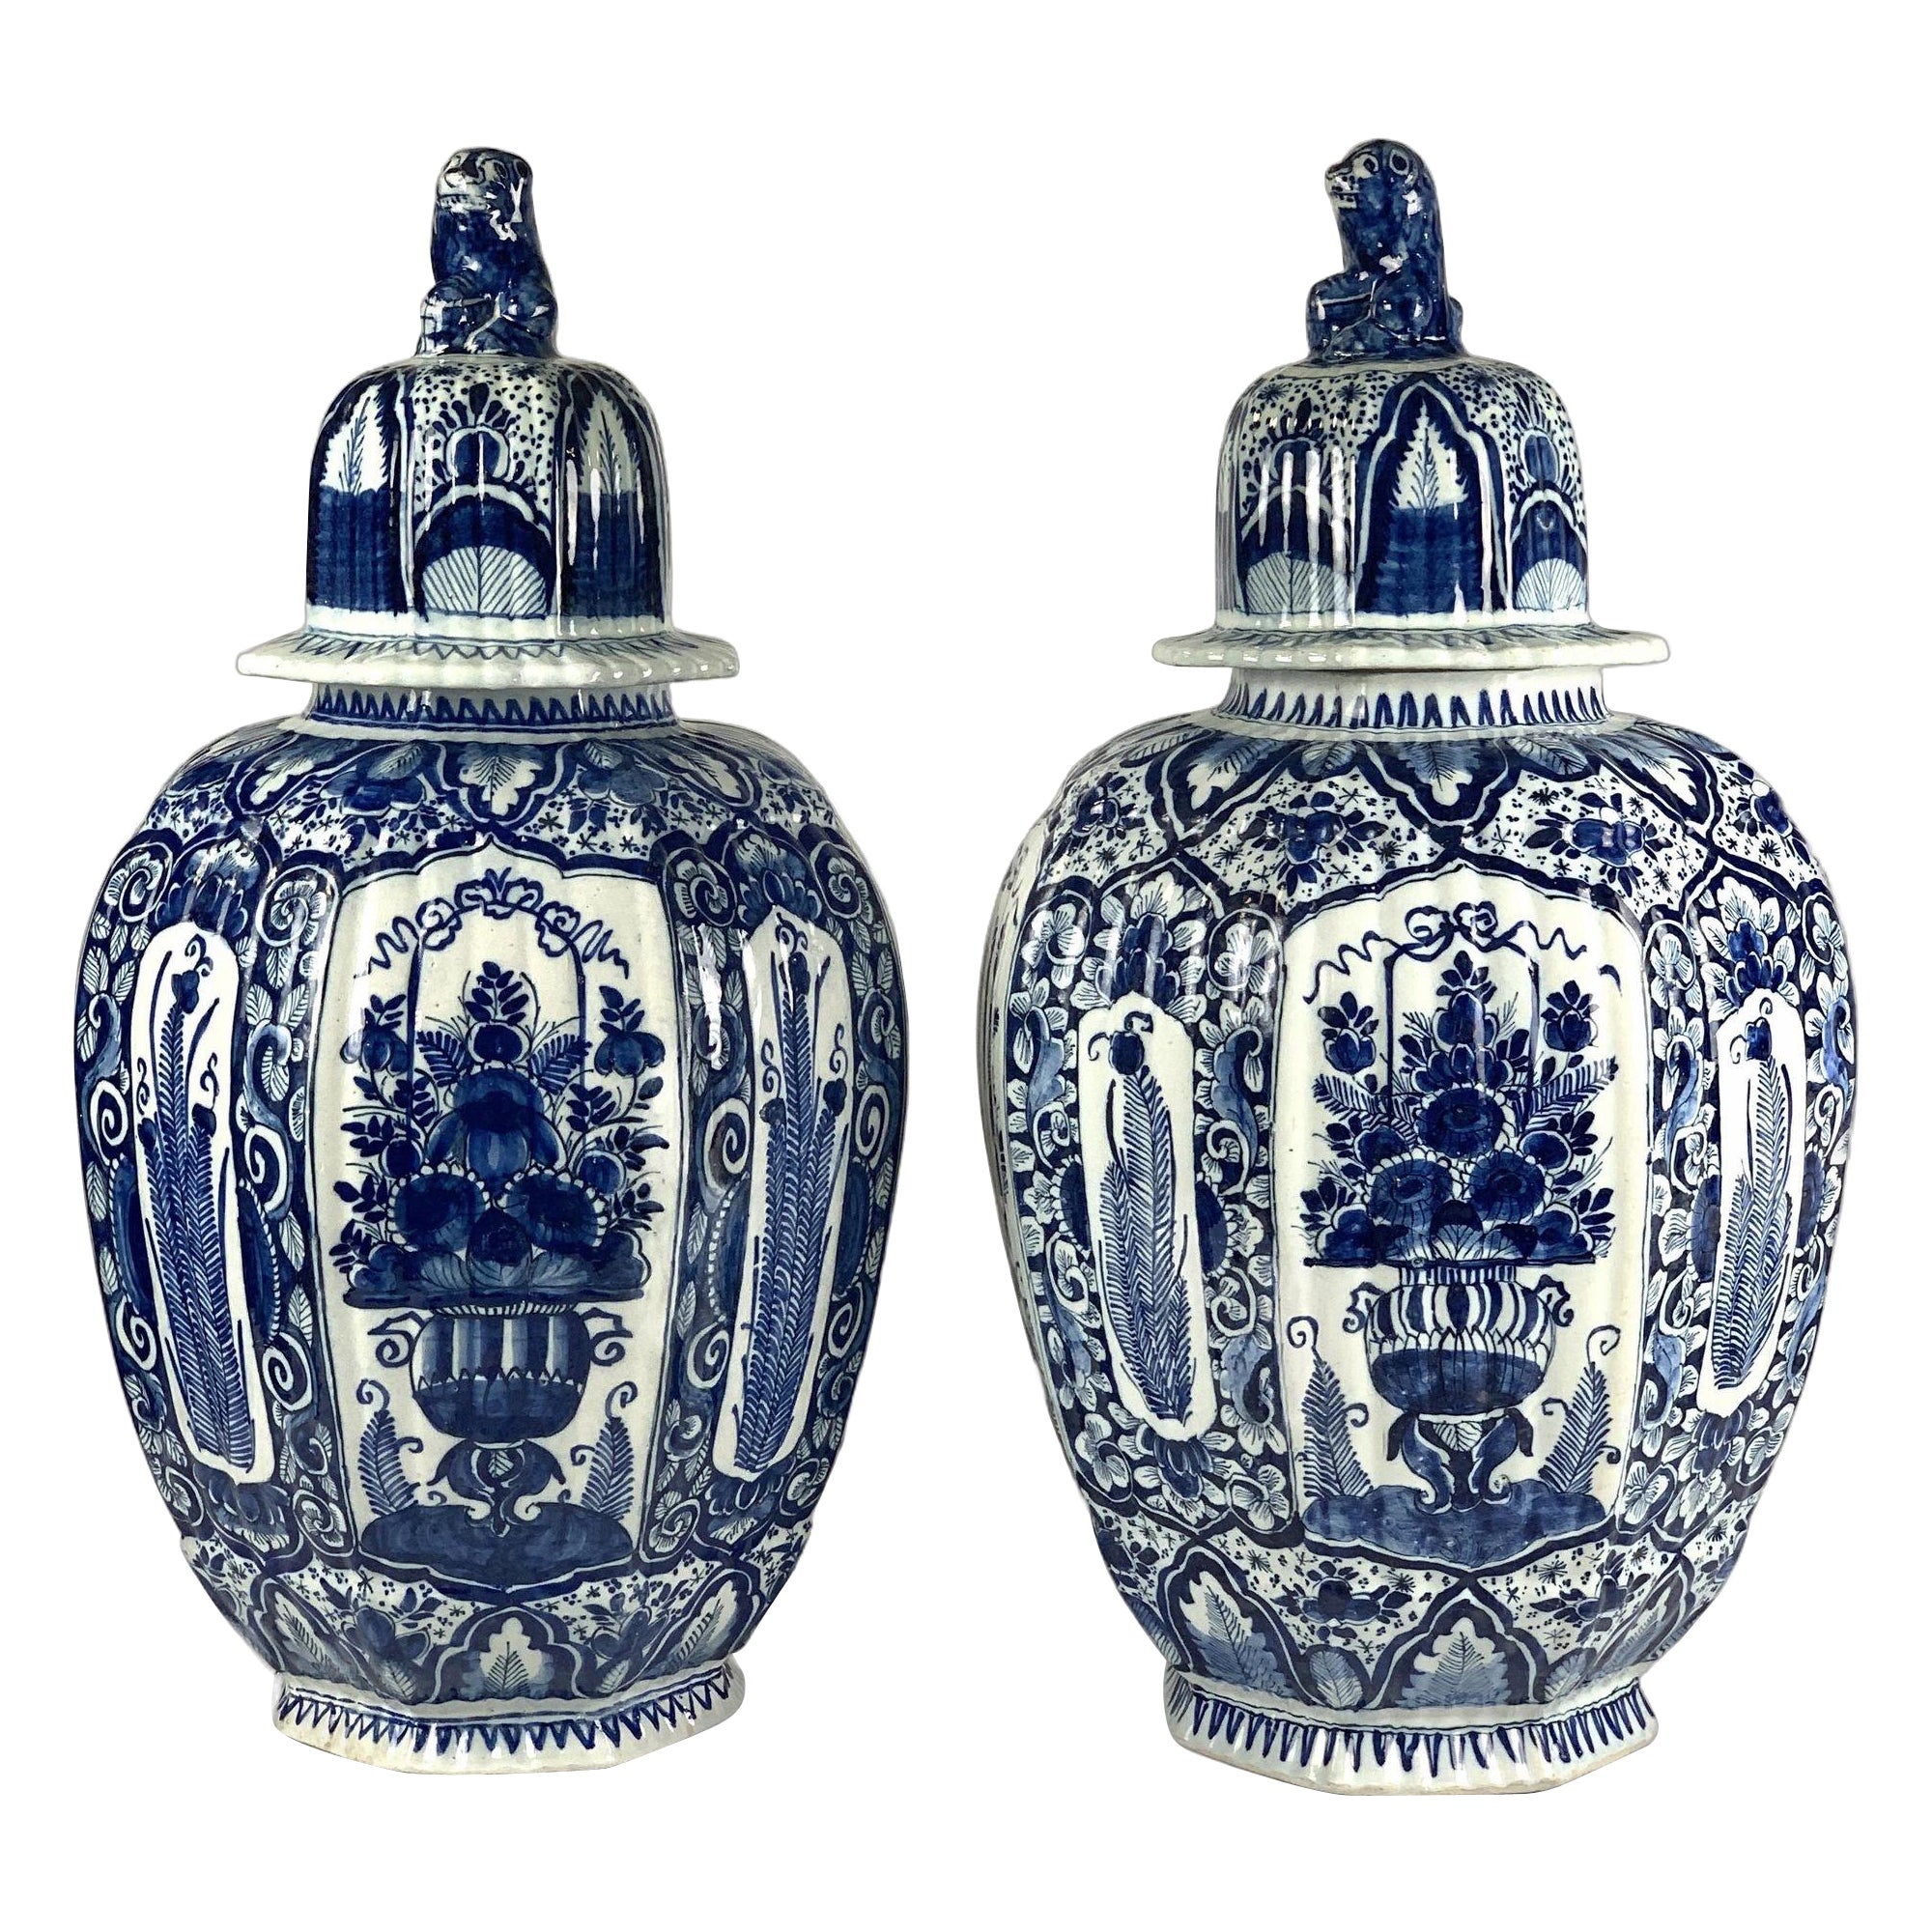 Large Blue and White Delft Jars Hand-Painted 18th Century Netherlands Circa 1780